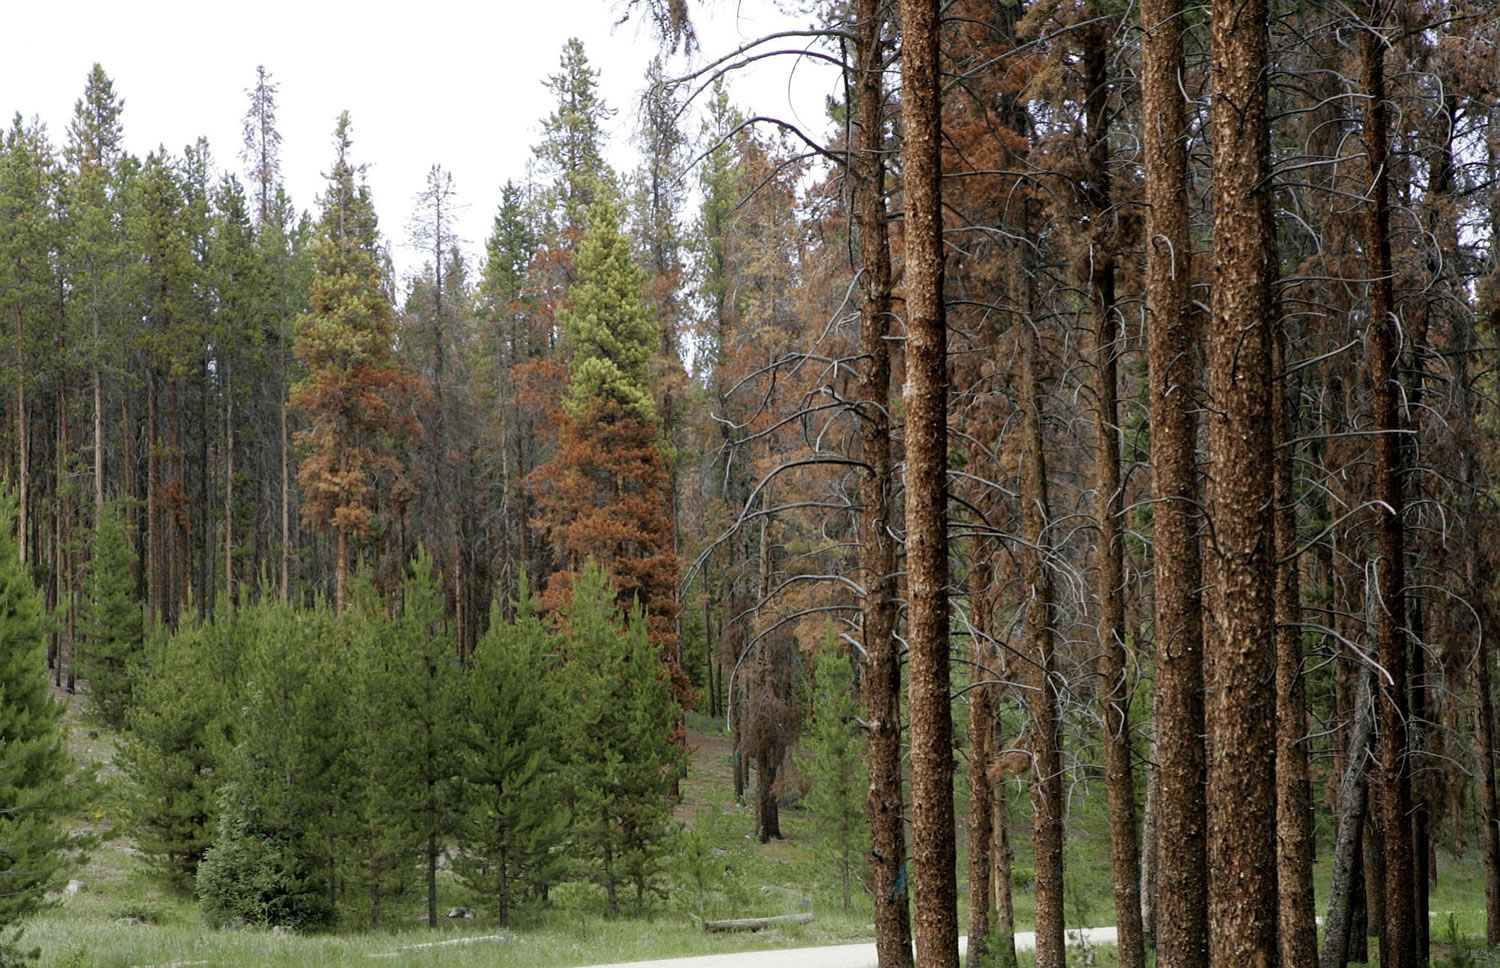 Associated Press files
Mountain pine beetles have left vast tracts of dead trees in the West, but a recent study has found no evidence the bugs are making fires spread farther.